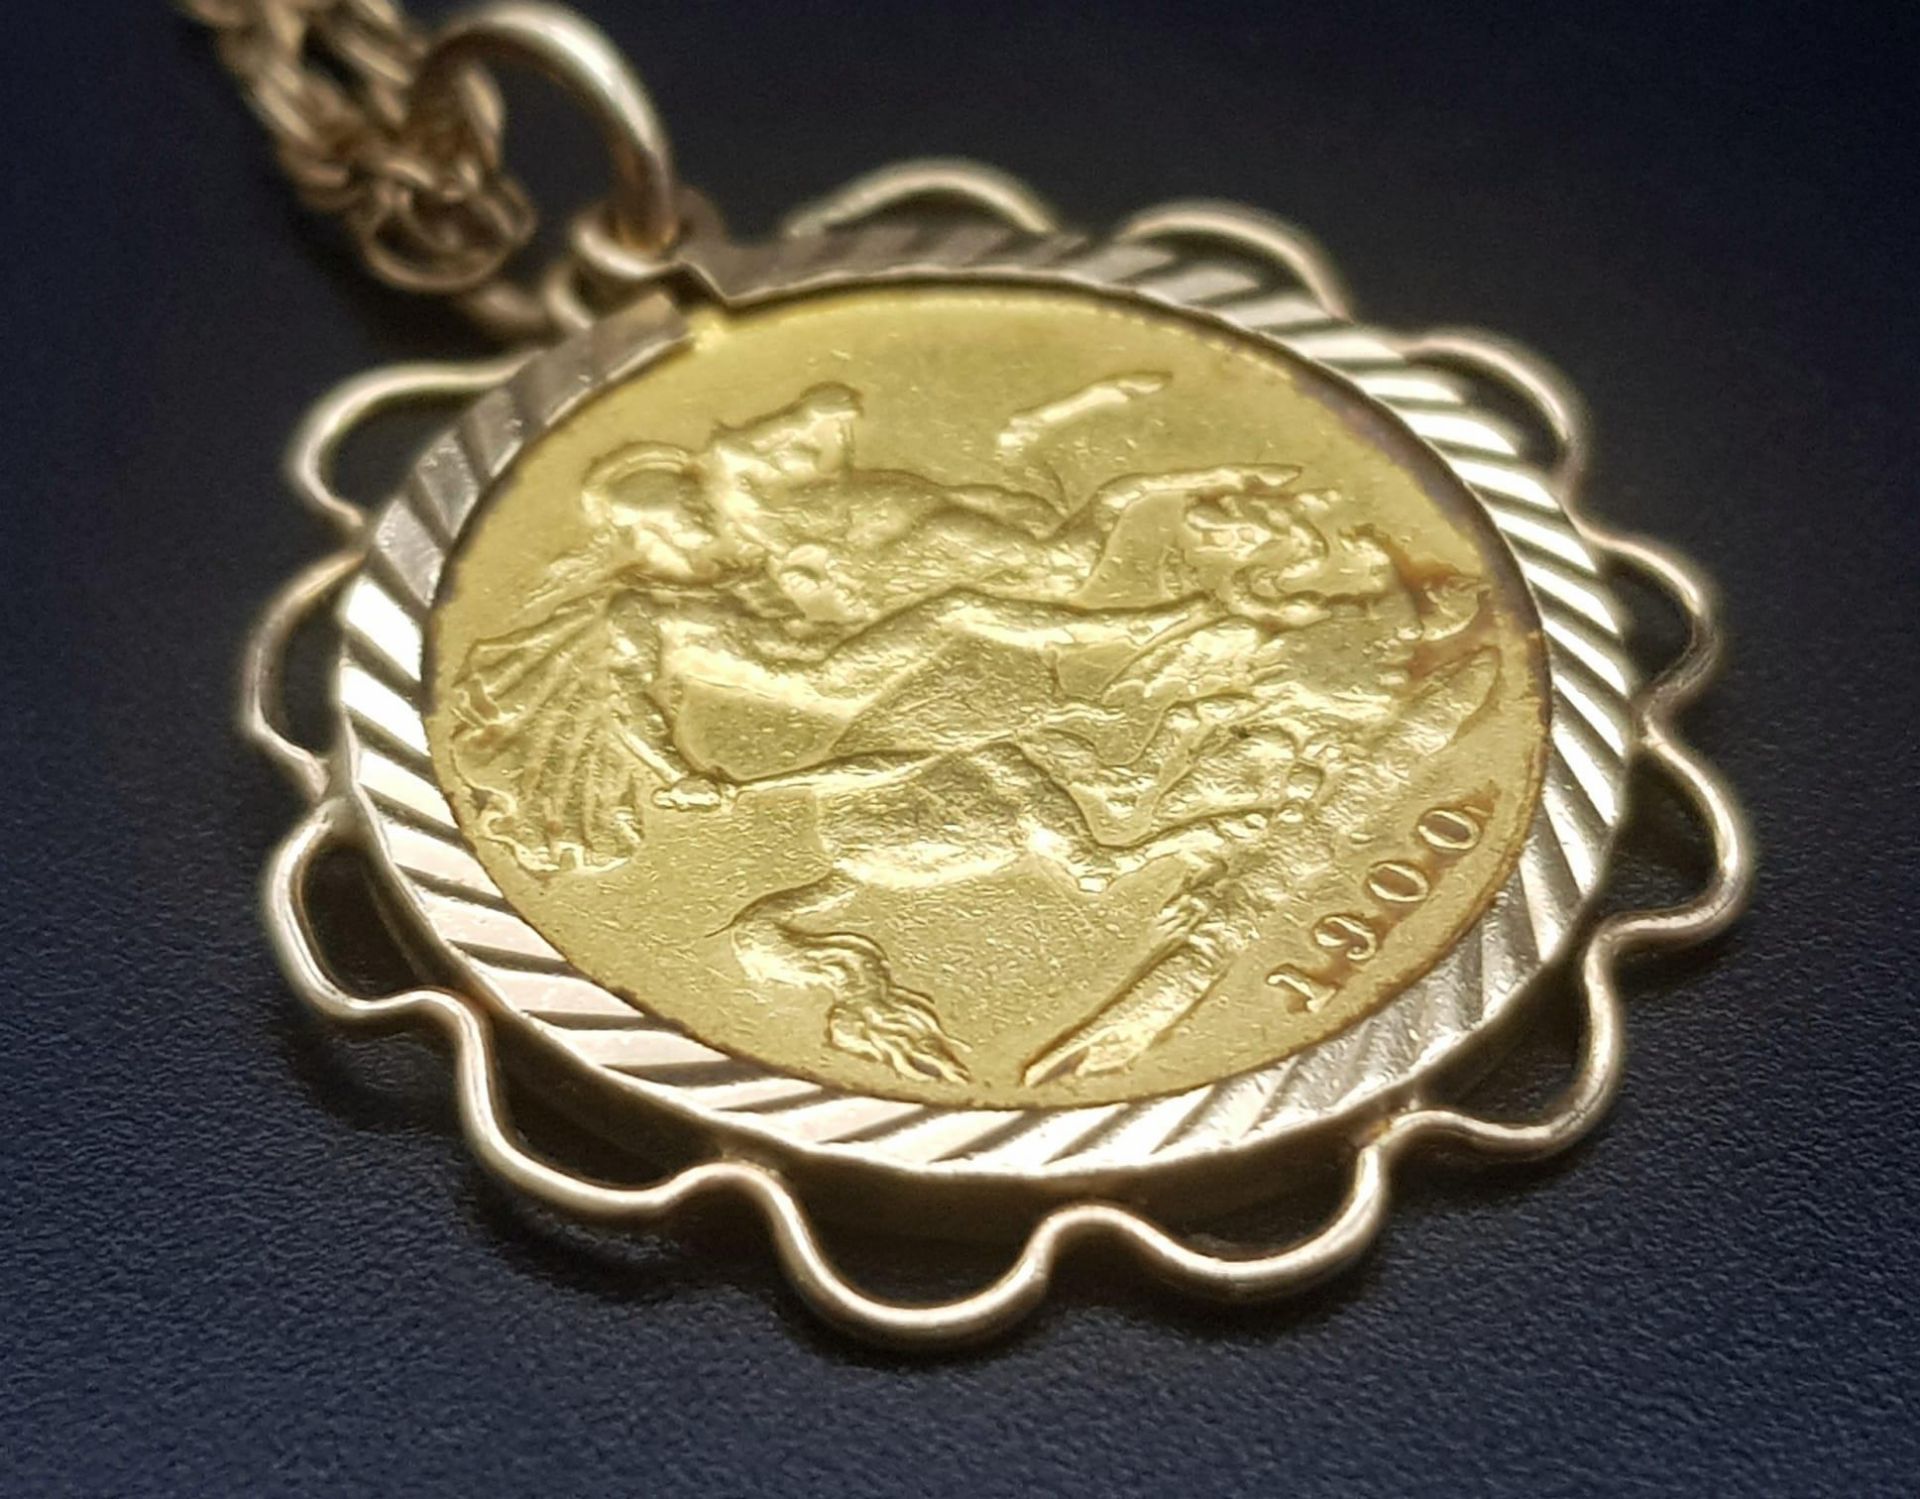 A 1900 22k Gold Queen Victoria Half Sovereign set in a 9K Gold Casing on a 9K Yellow Gold Chain - - Image 6 of 6